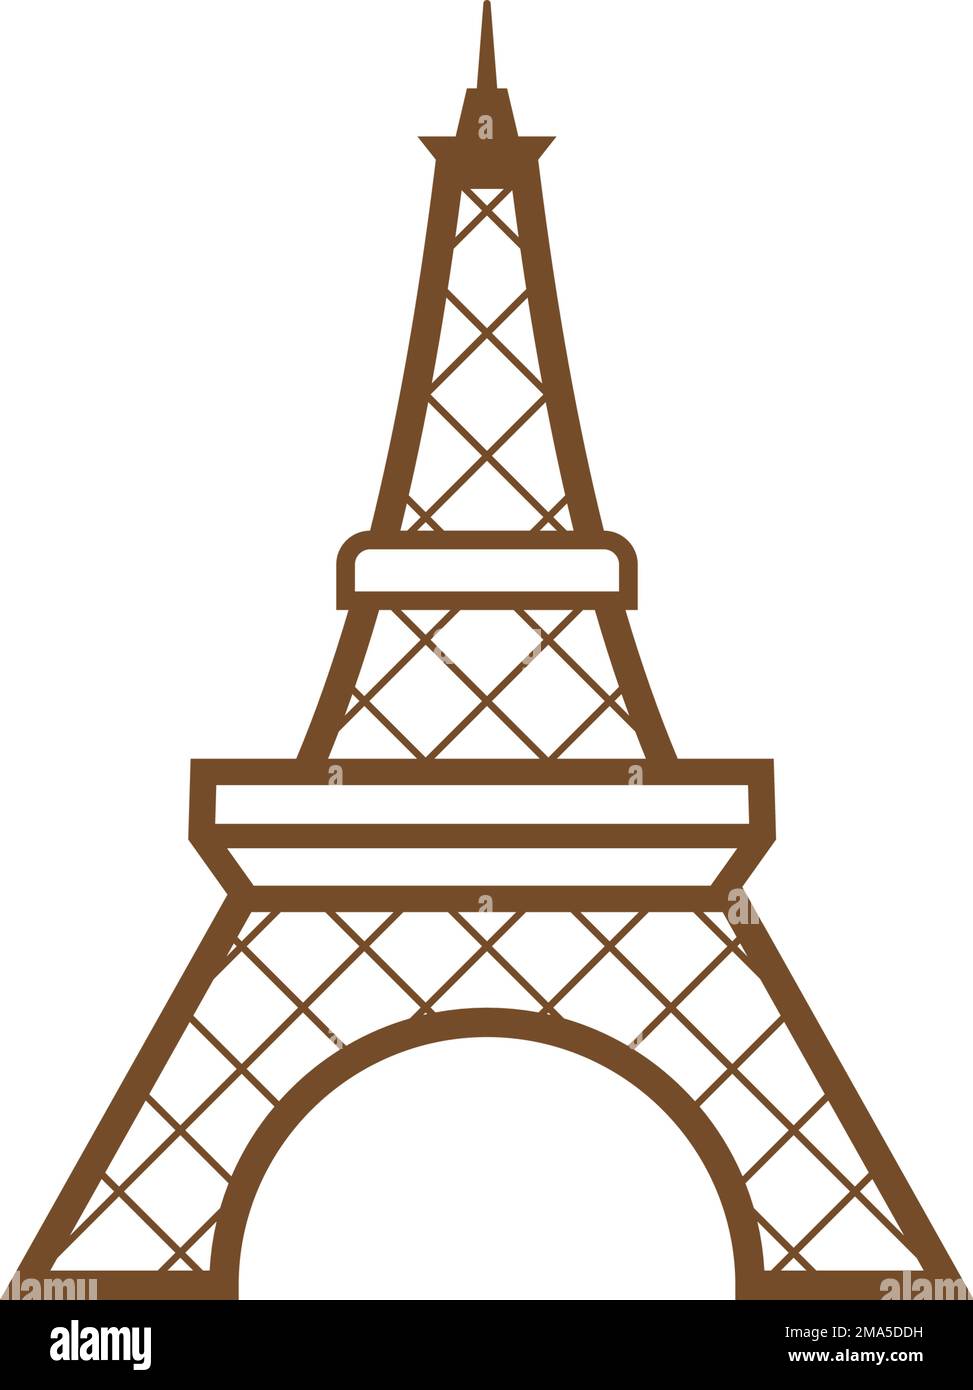 How To Draw The Eiffel Tower For Kids | Eiffel Tower Drawing | - YouTube